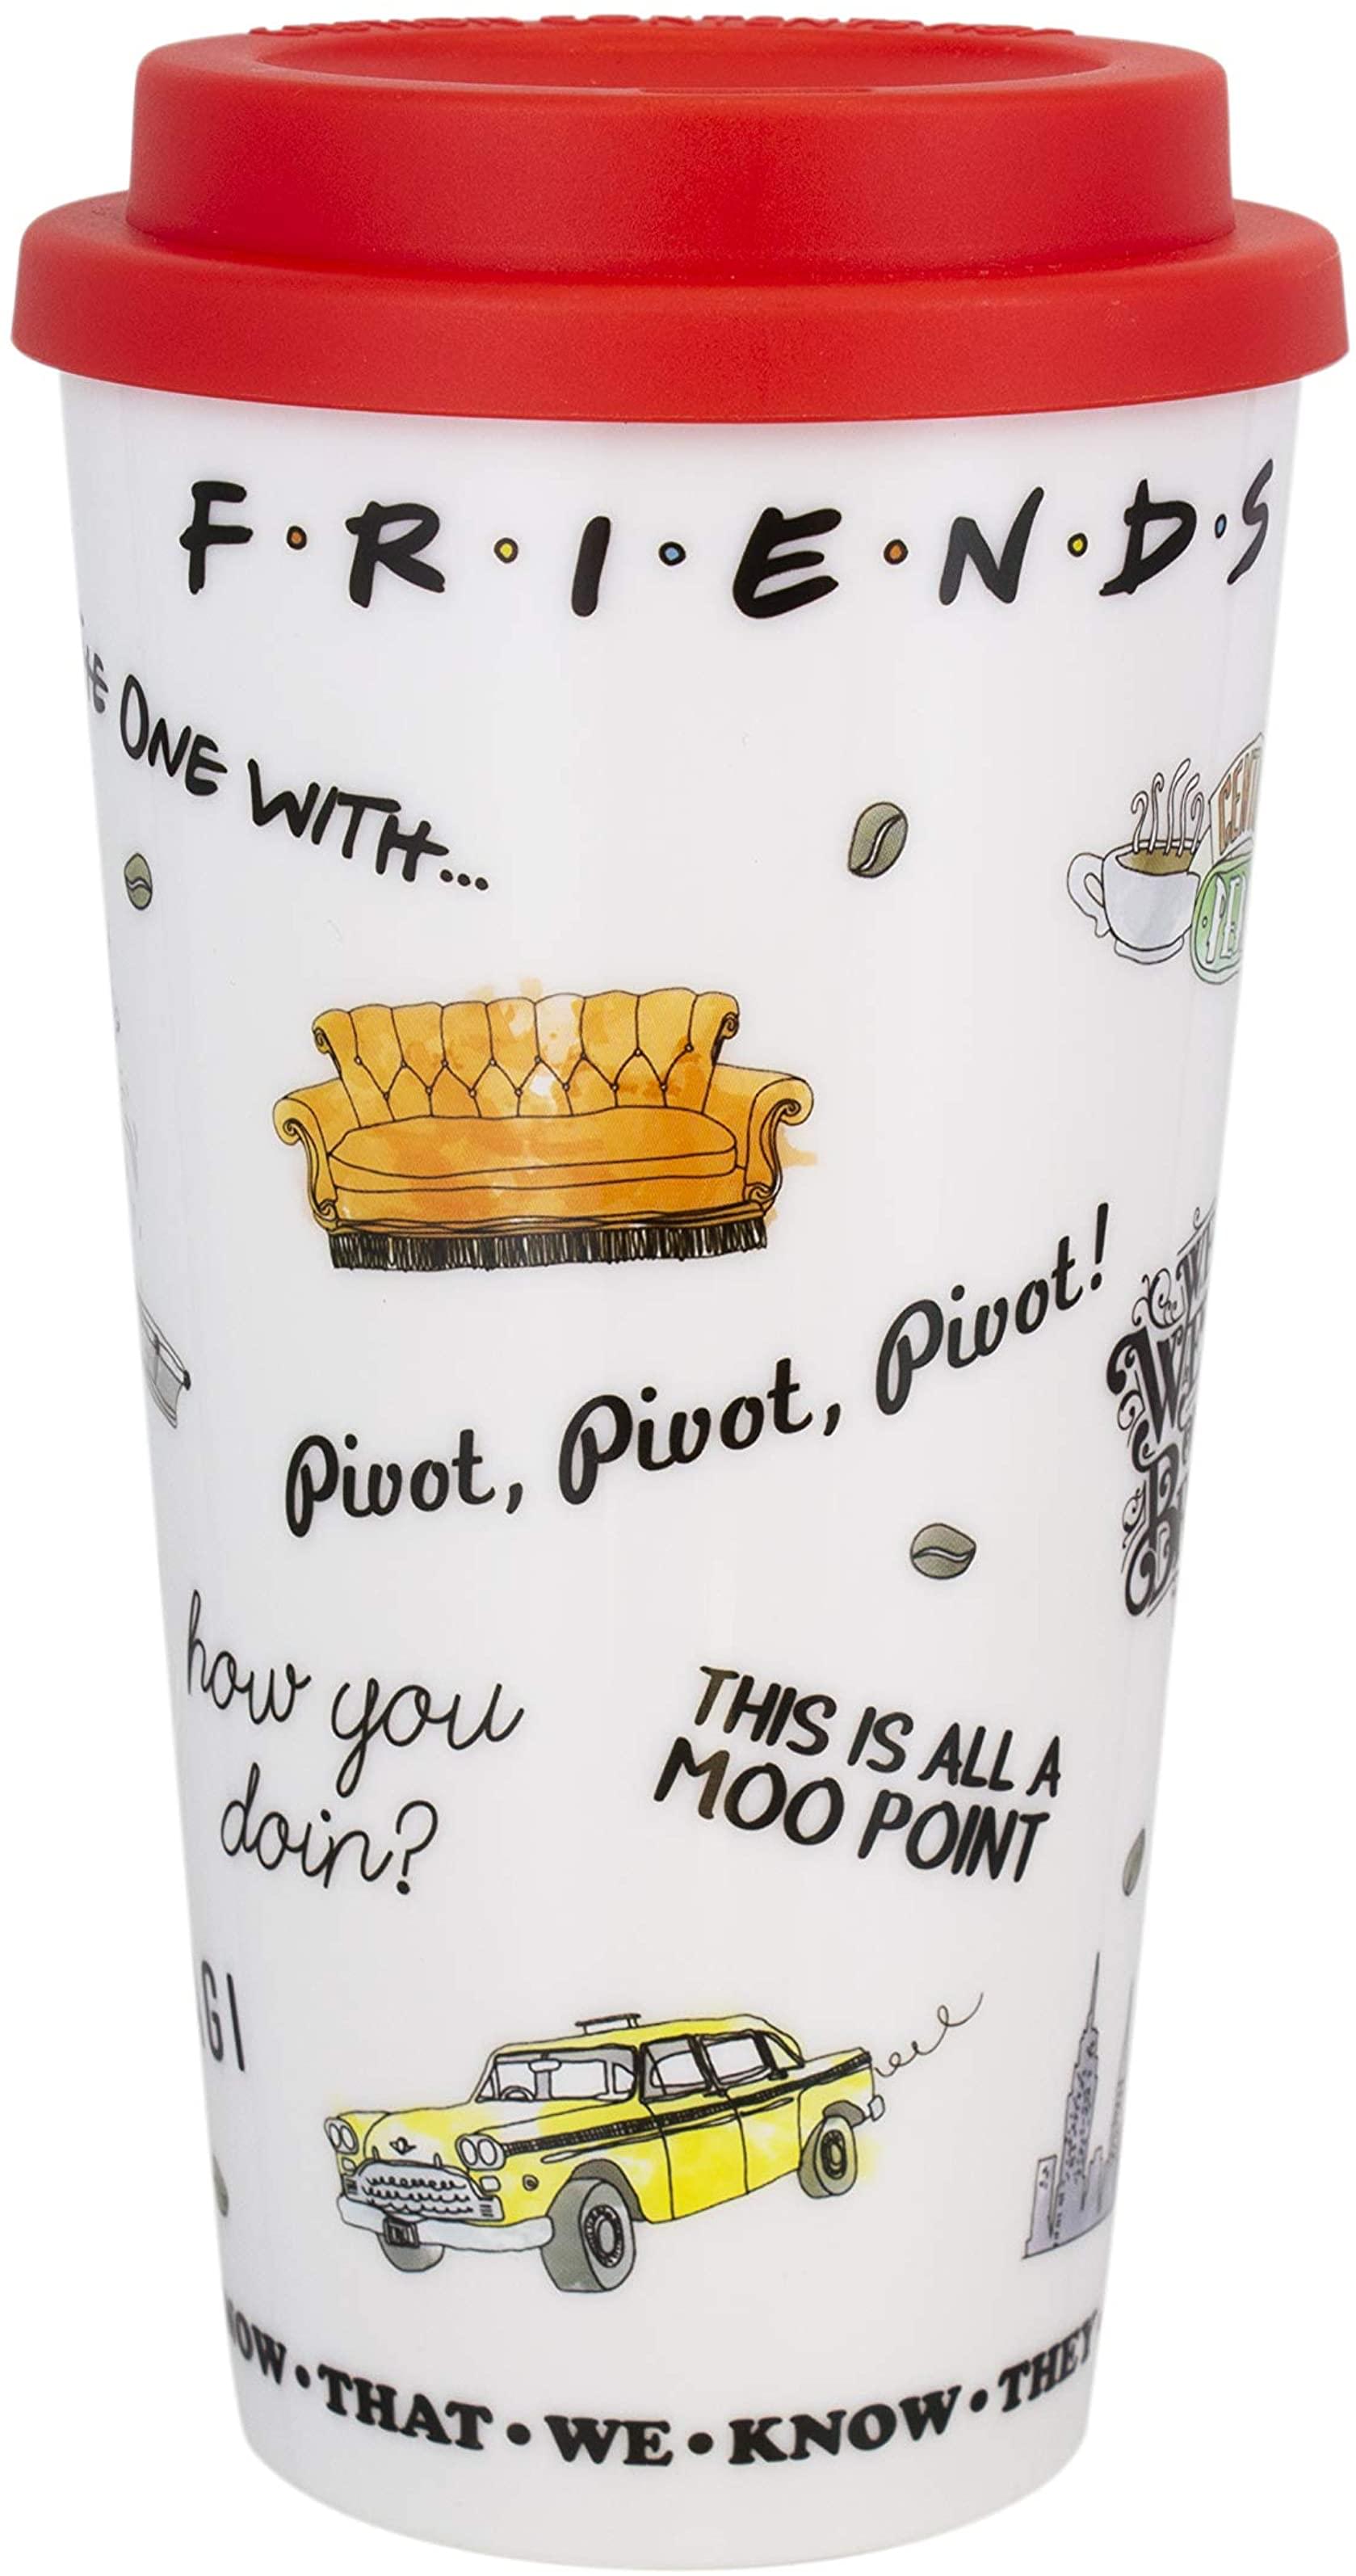 Paladone Central Perk Tea Gift Set, Officially Licensed Friends TV Show  Merchandise